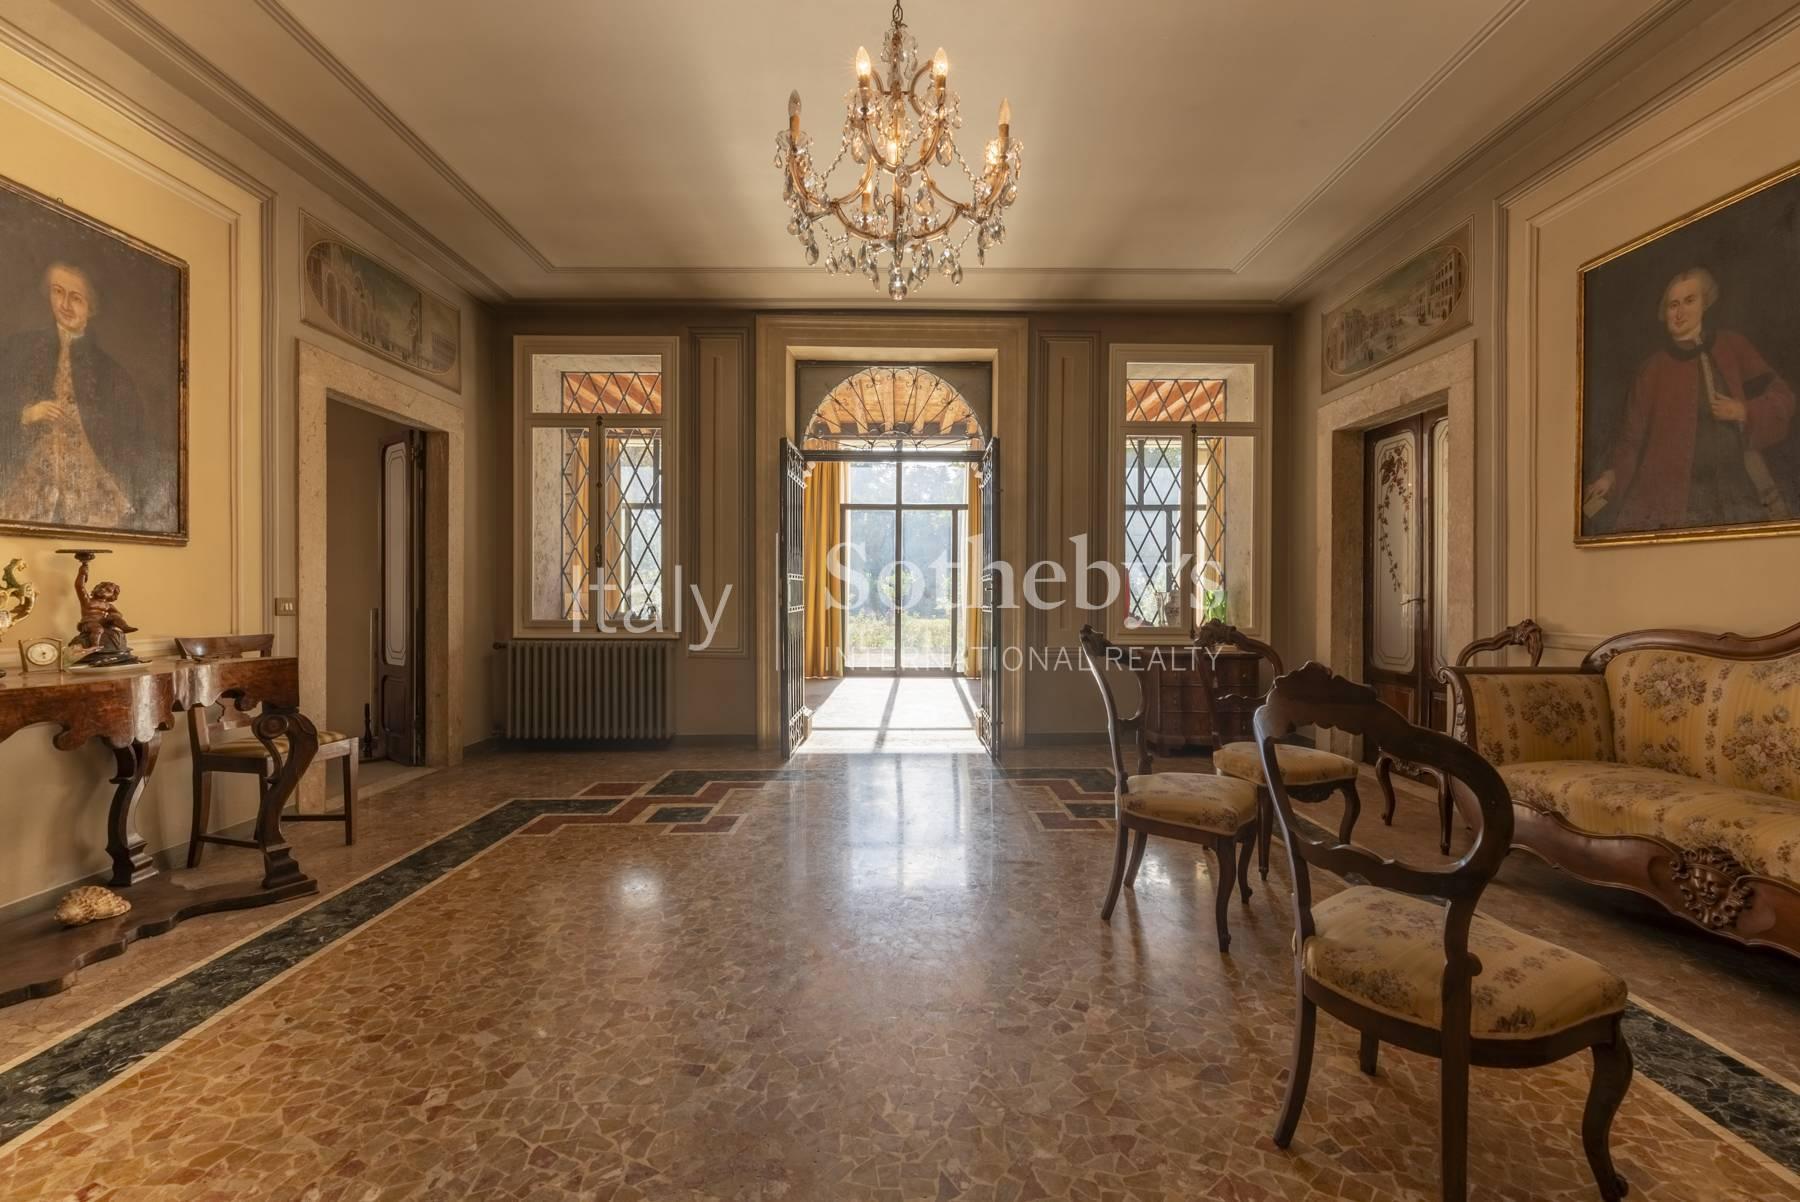 Neoclassical Venetian Villa with park and outbuildings - 4